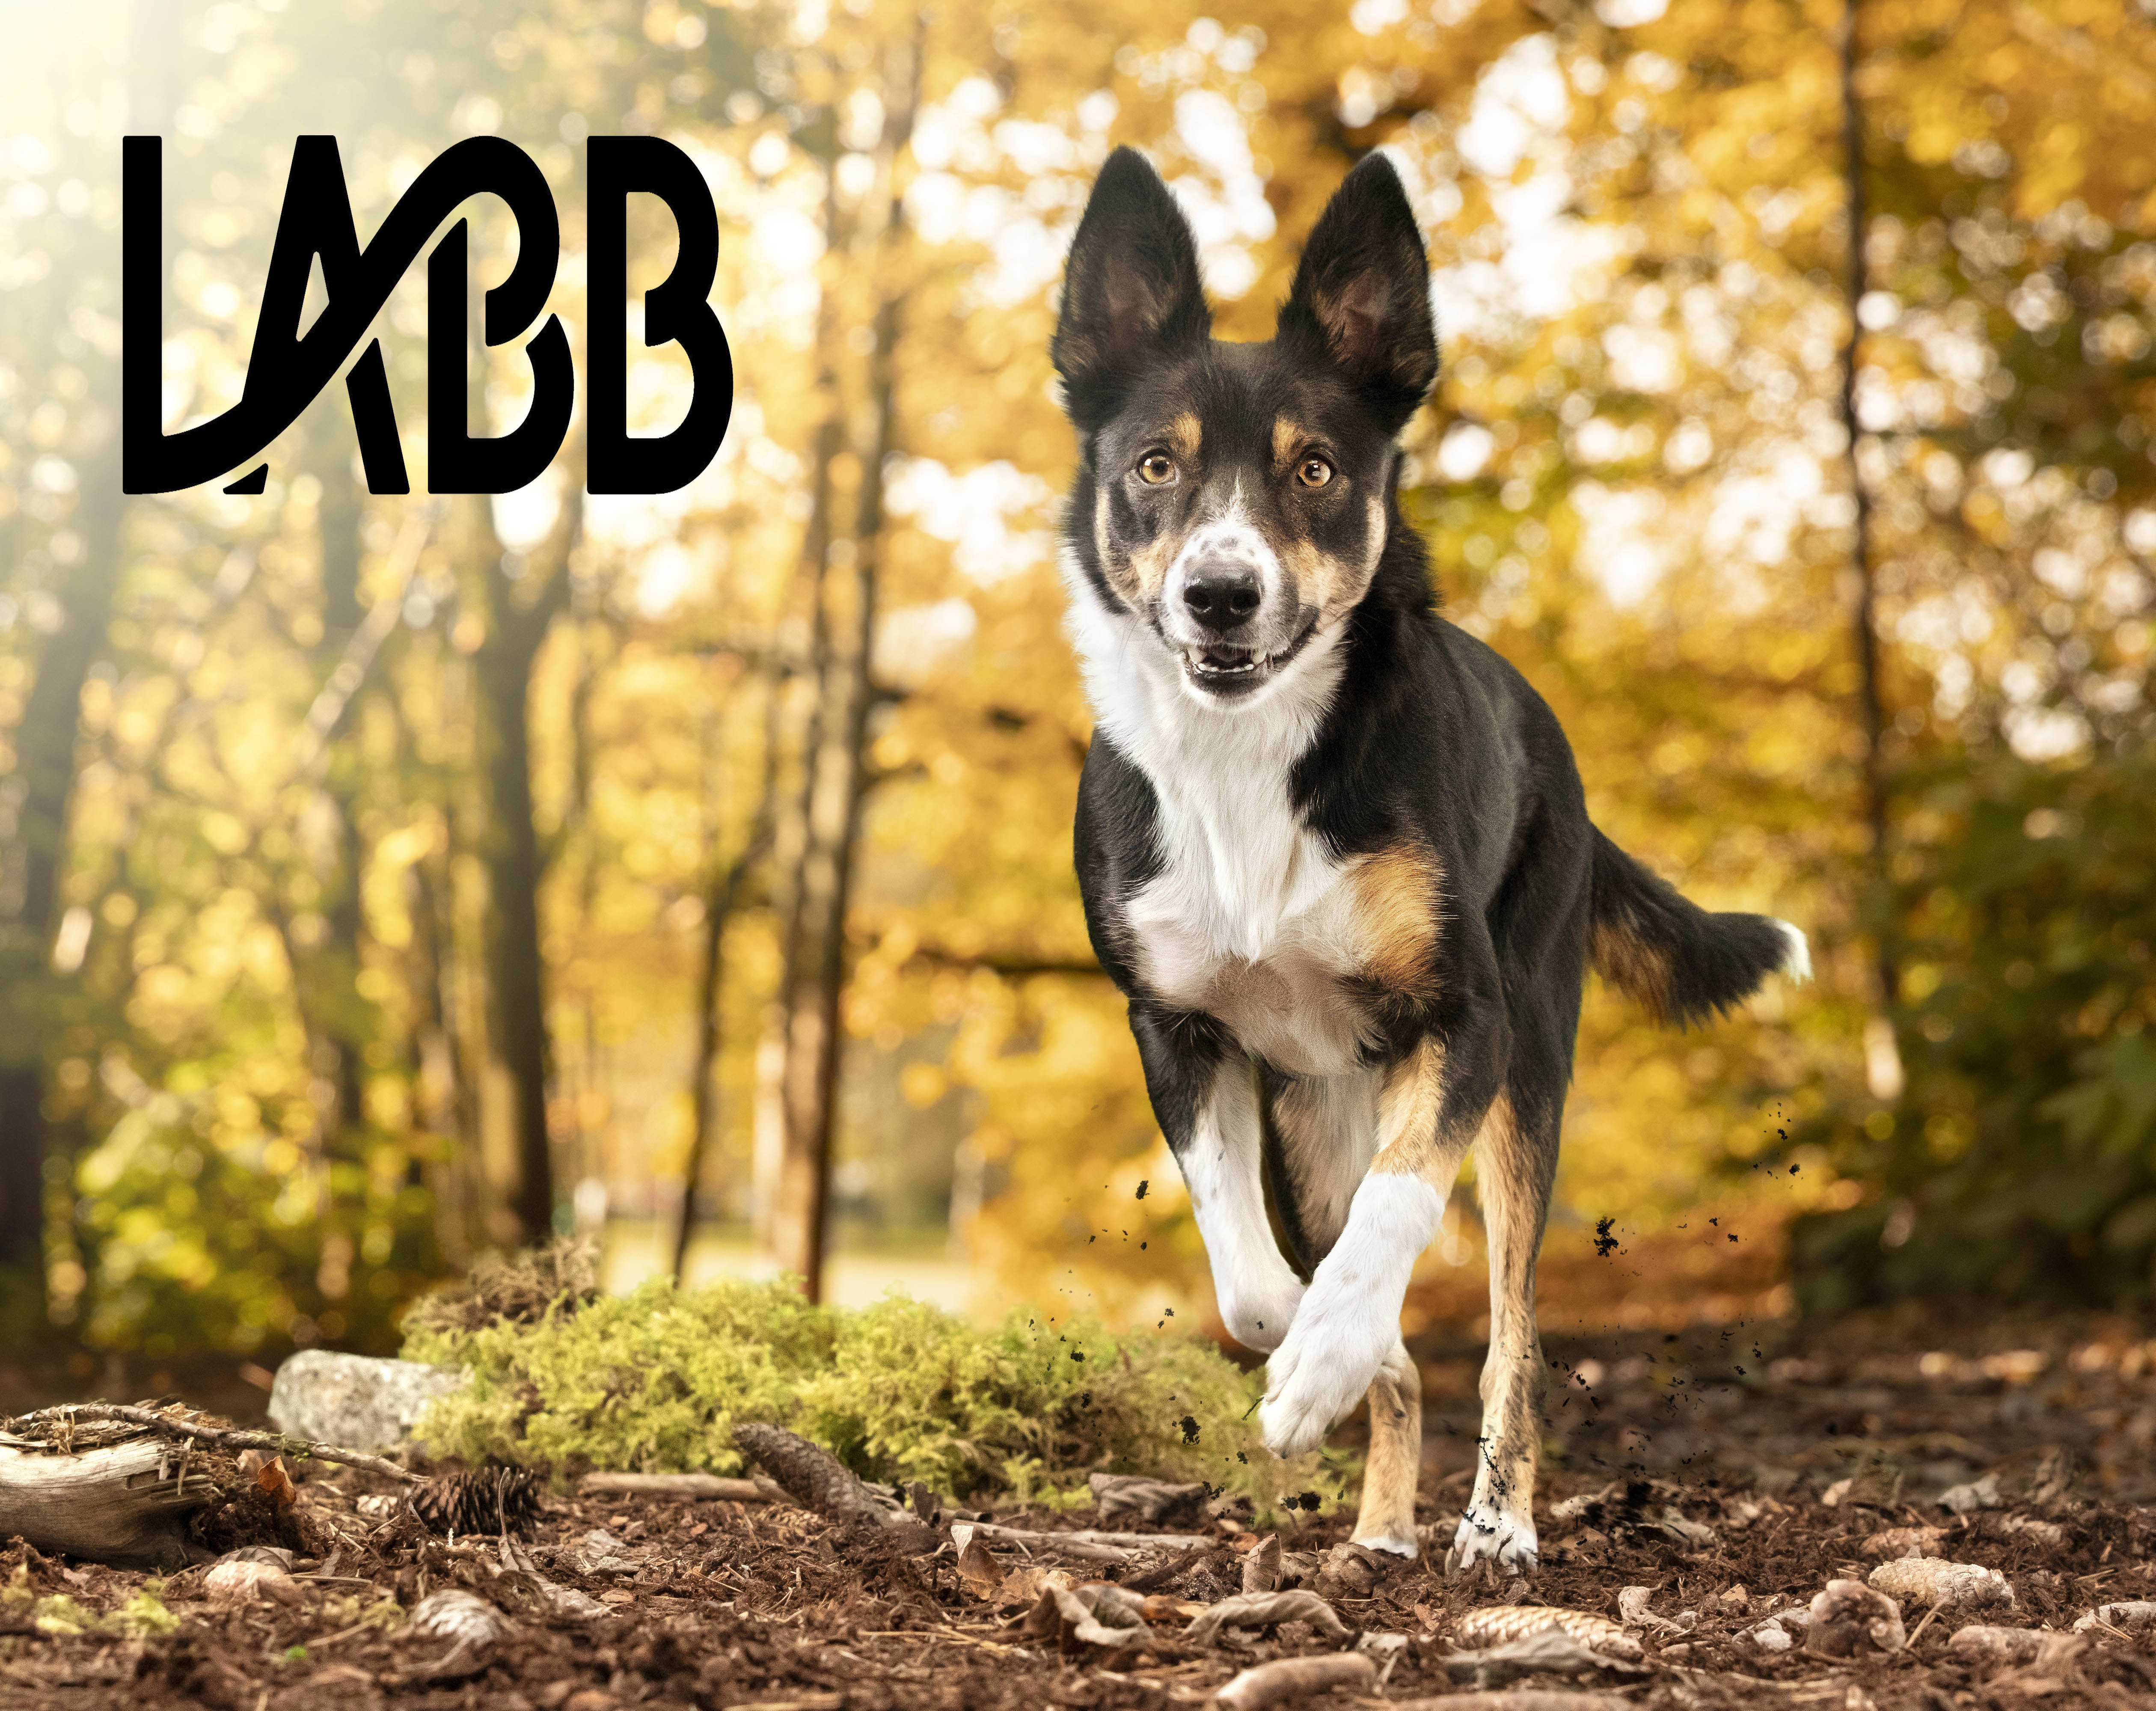 Felleskjøpet has recently made the change to using Norwegian ingredients in Labb food for cats and dogs - both hydrolyzed proteins and oil from Bioco is used in the new recipe.